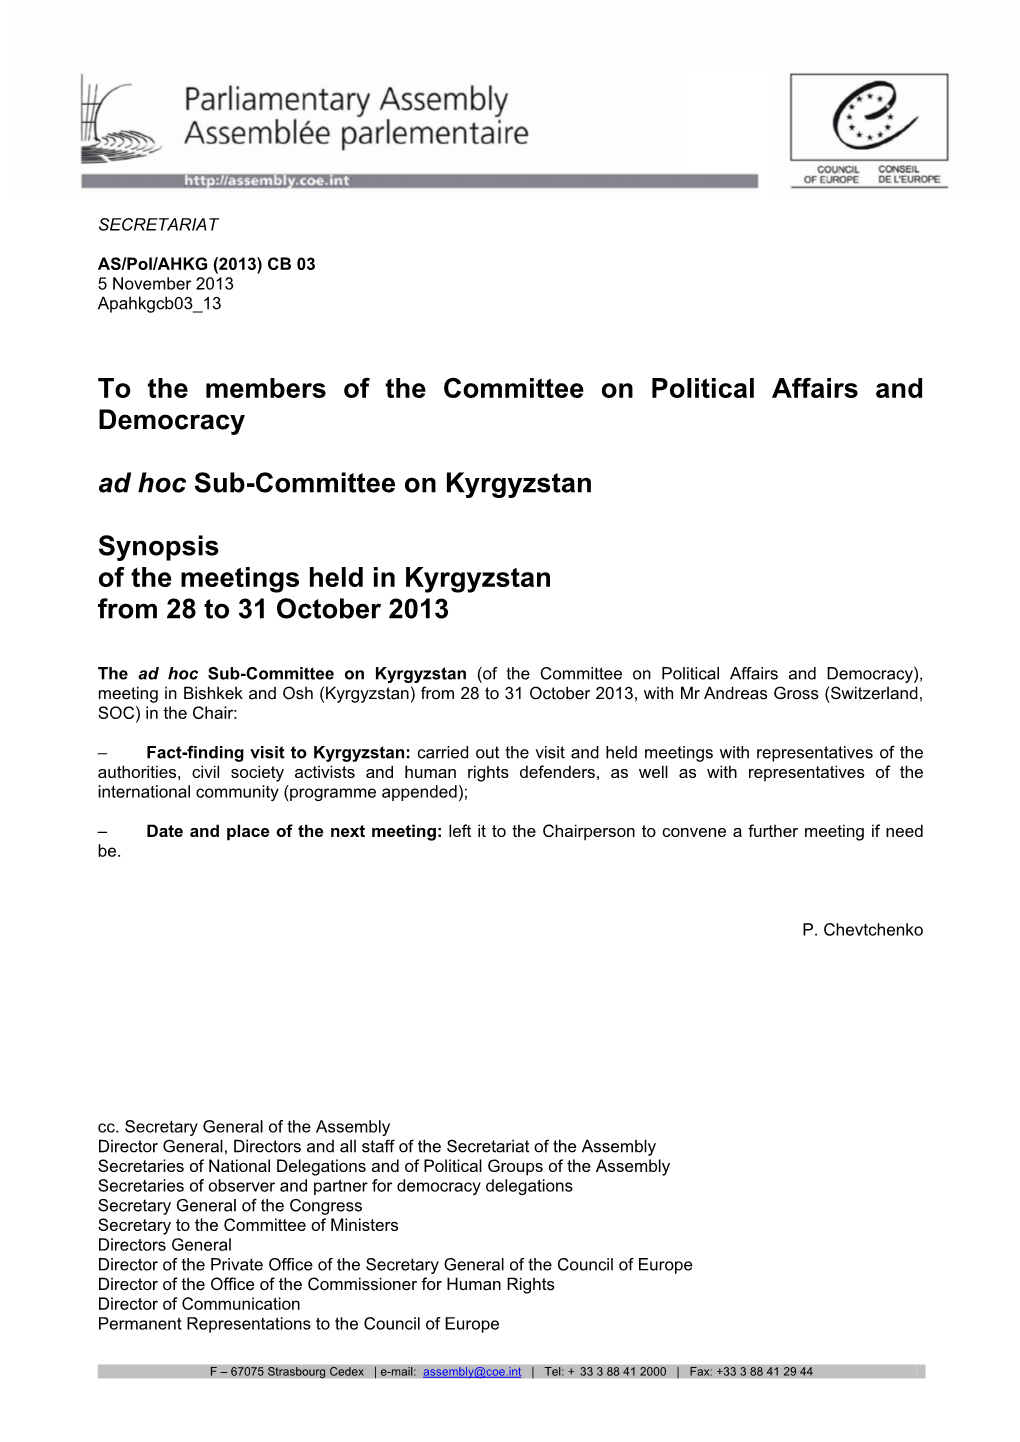 To the Members of the Committee on Political Affairs and Democracy Ad Hoc Sub-Committee on Kyrgyzstan